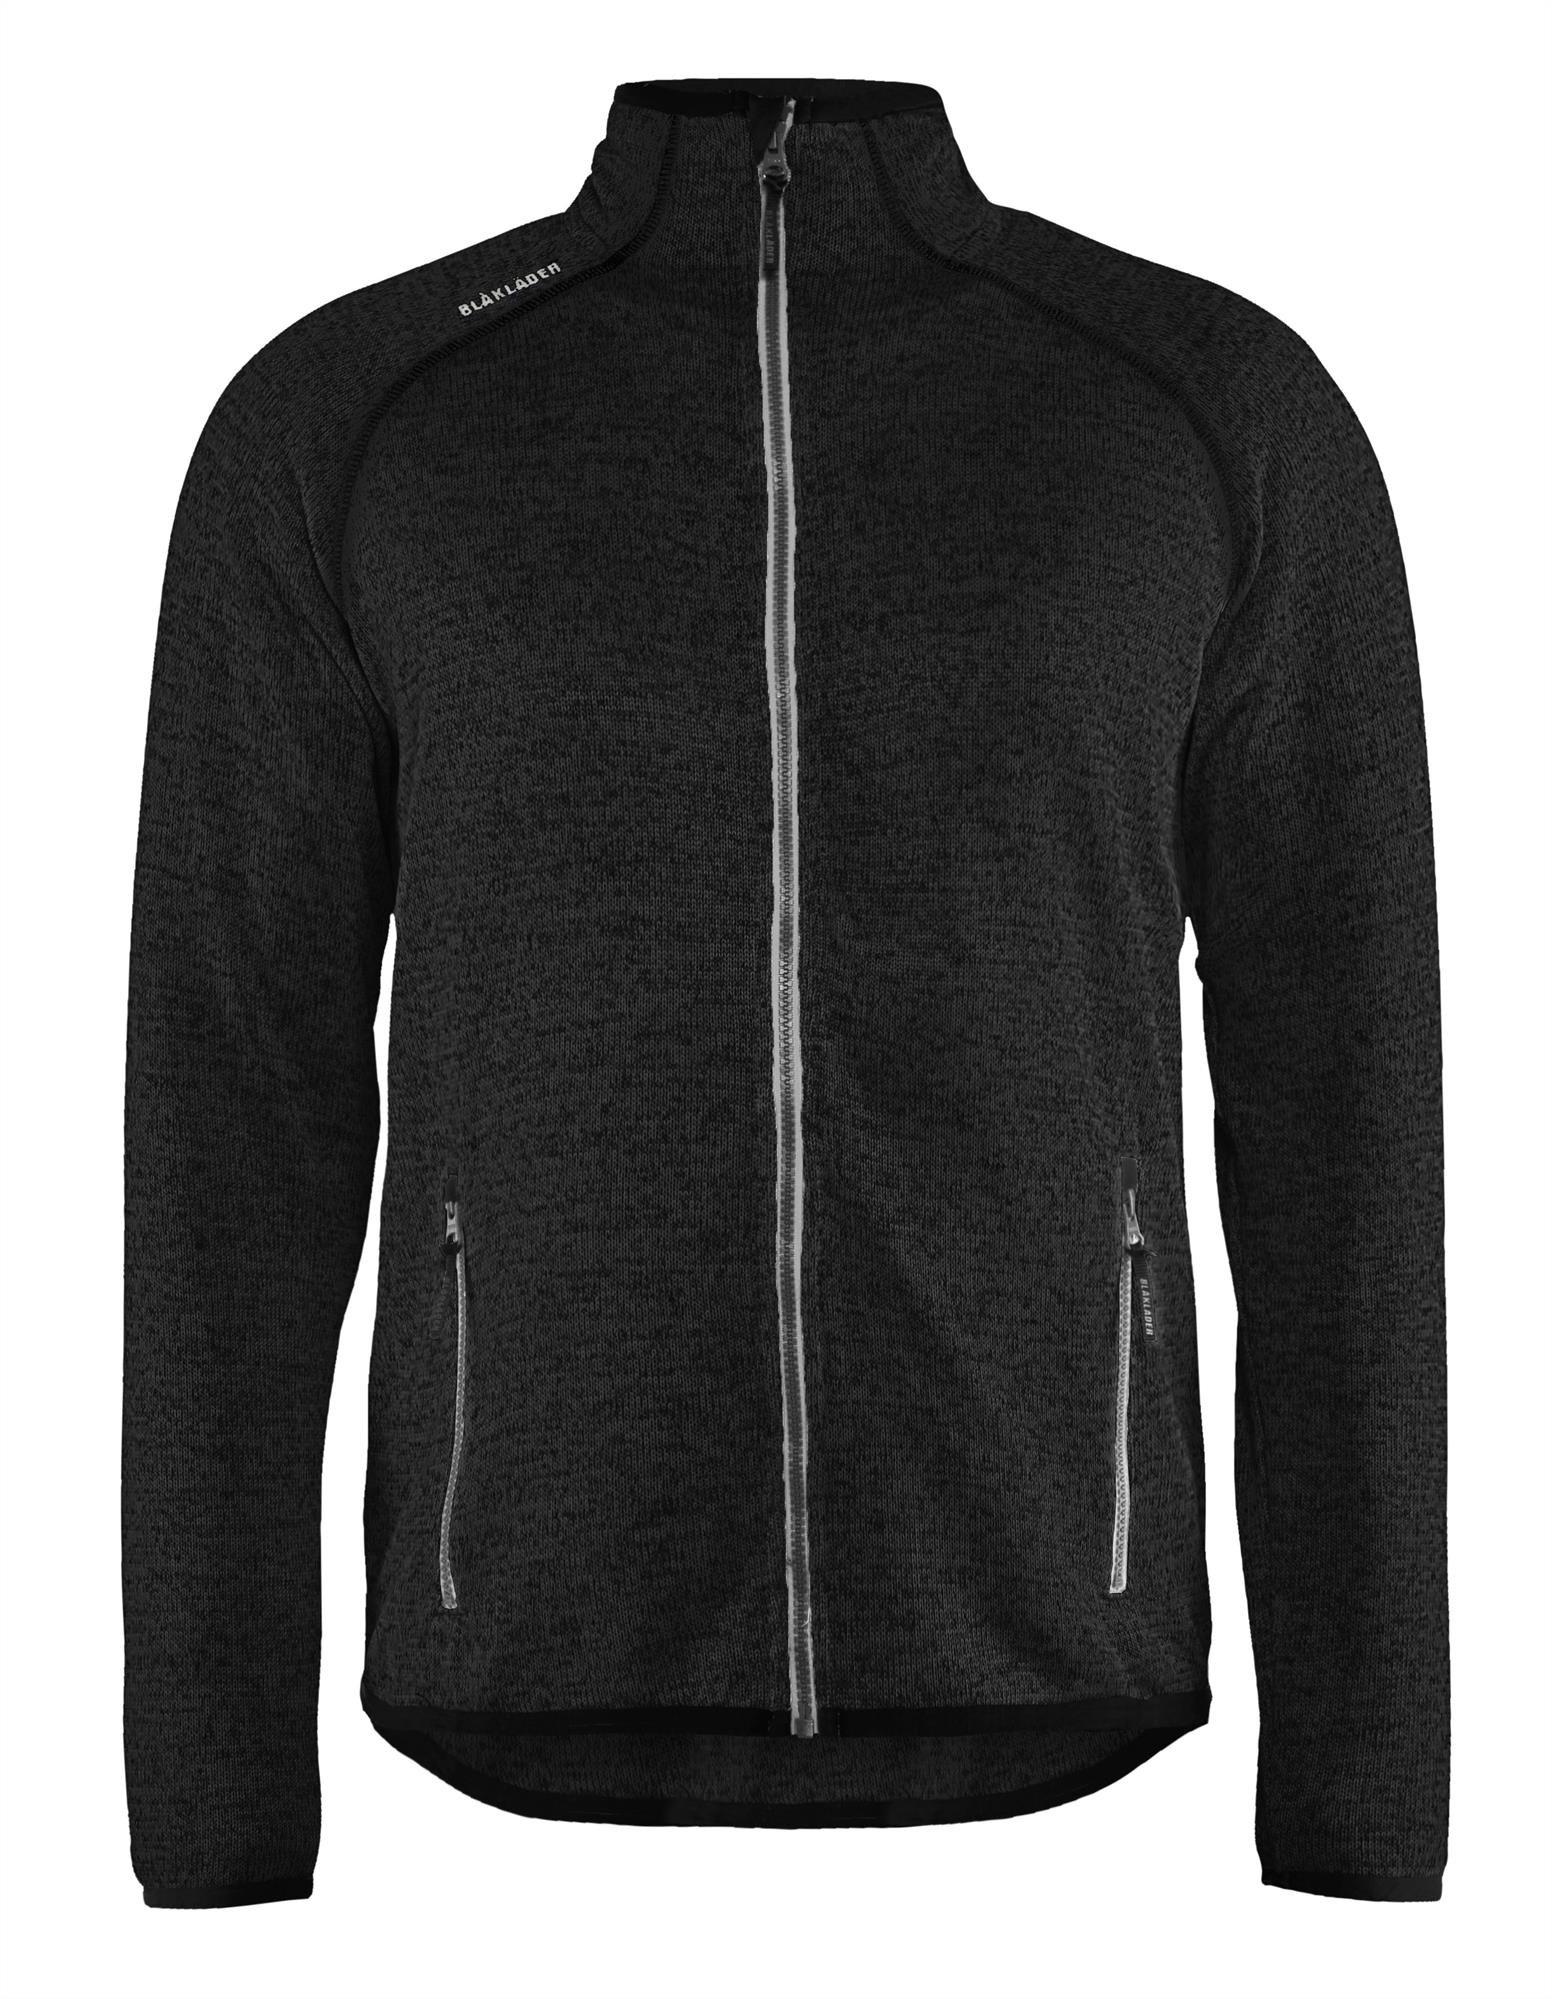 Blaklader anthracite/white contrast zip men's knitted polycotton jacket #4942